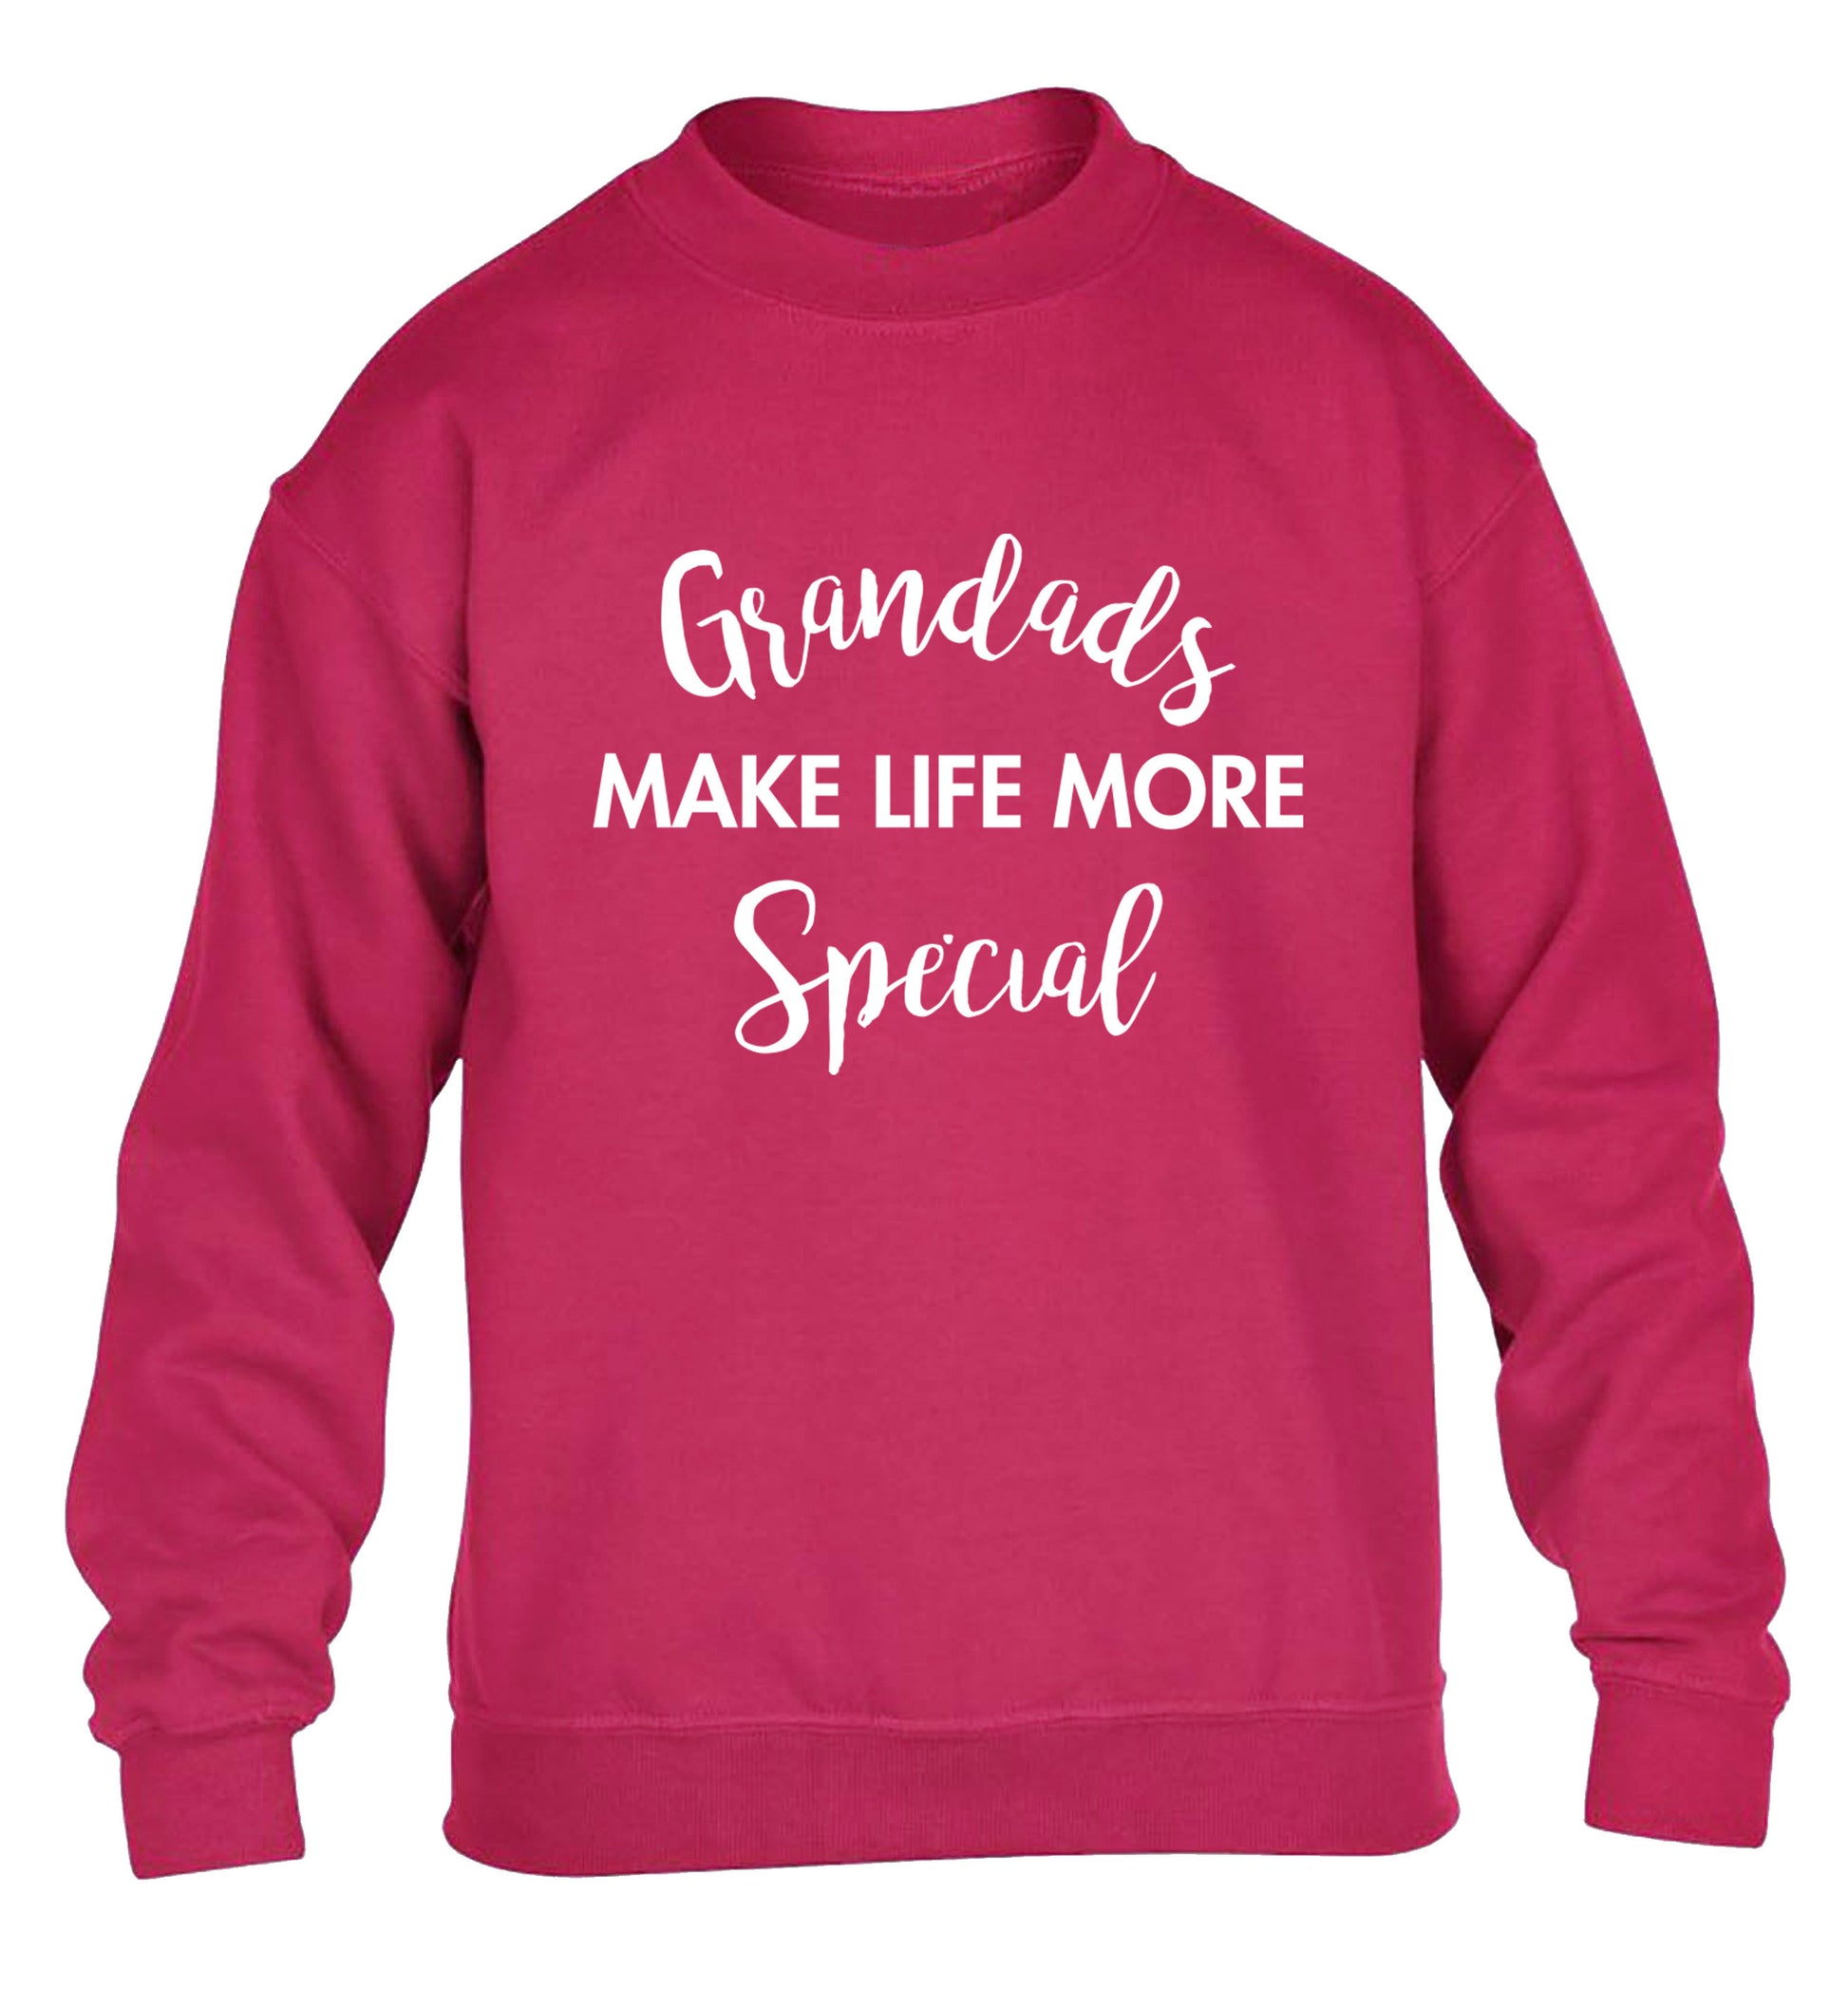 Grandads make life more special children's pink sweater 12-14 Years